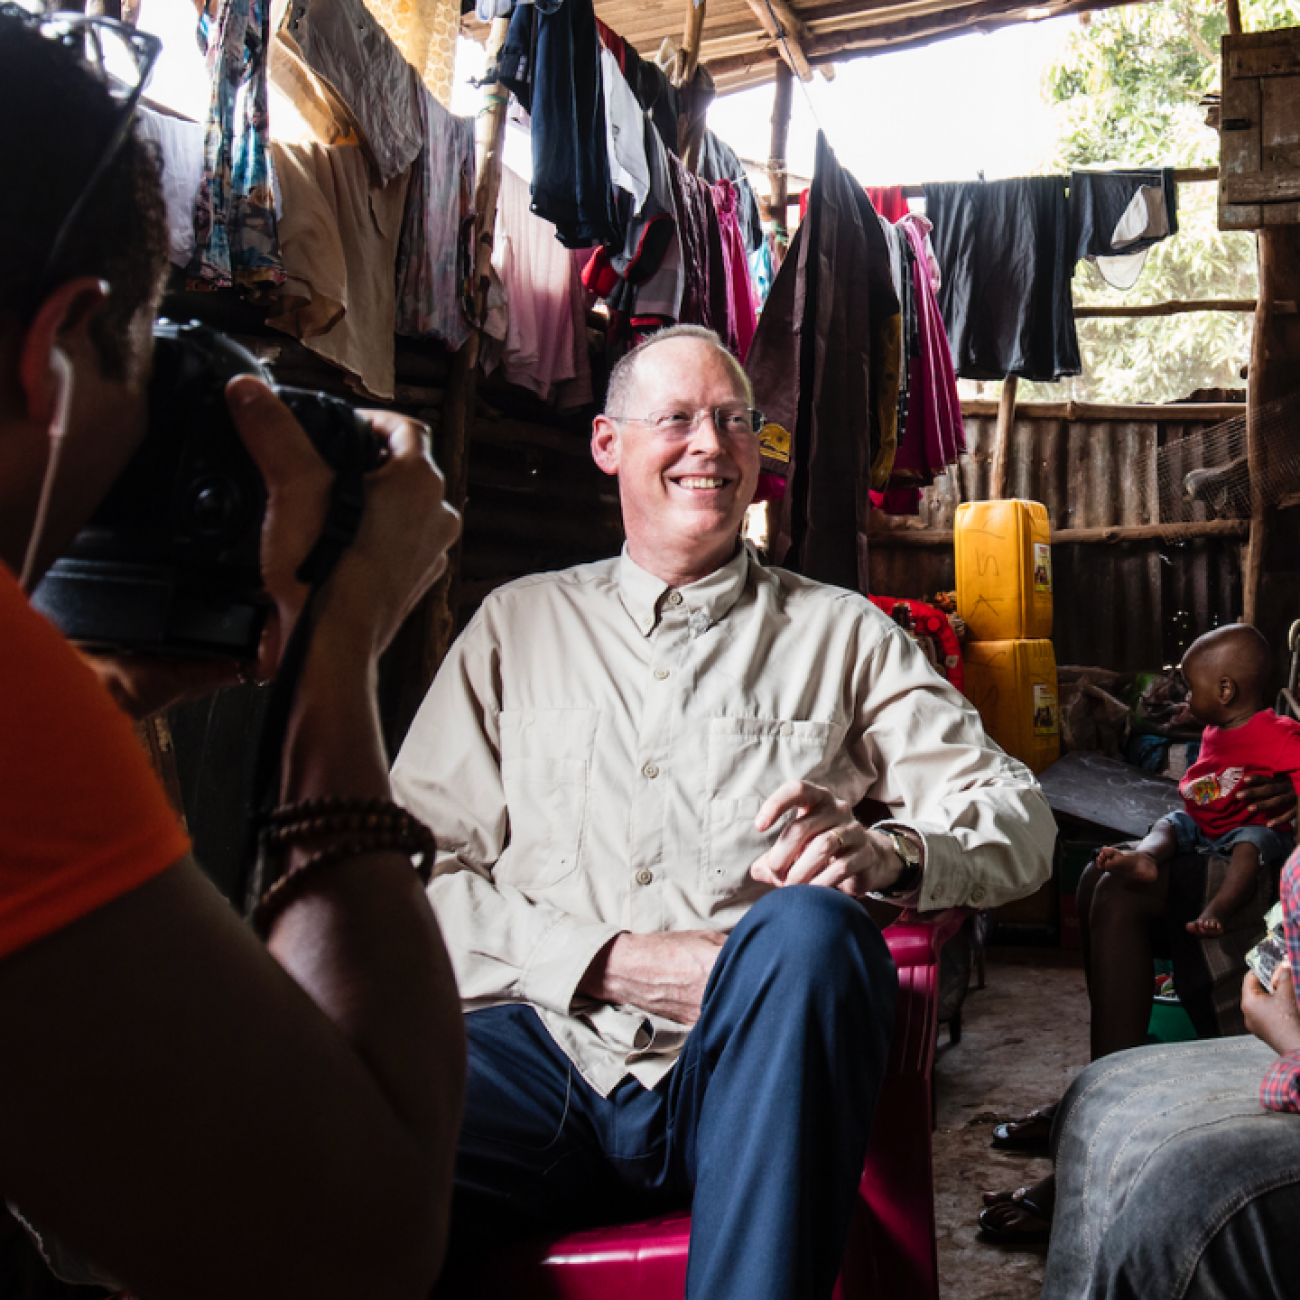 Paul Farmer visits Ebola survivor Yabom Koroma and her family at their home in the Mountain Court section of Freetown, Sierra Leone on December 14, 2015. Photo courtesy of PIH.